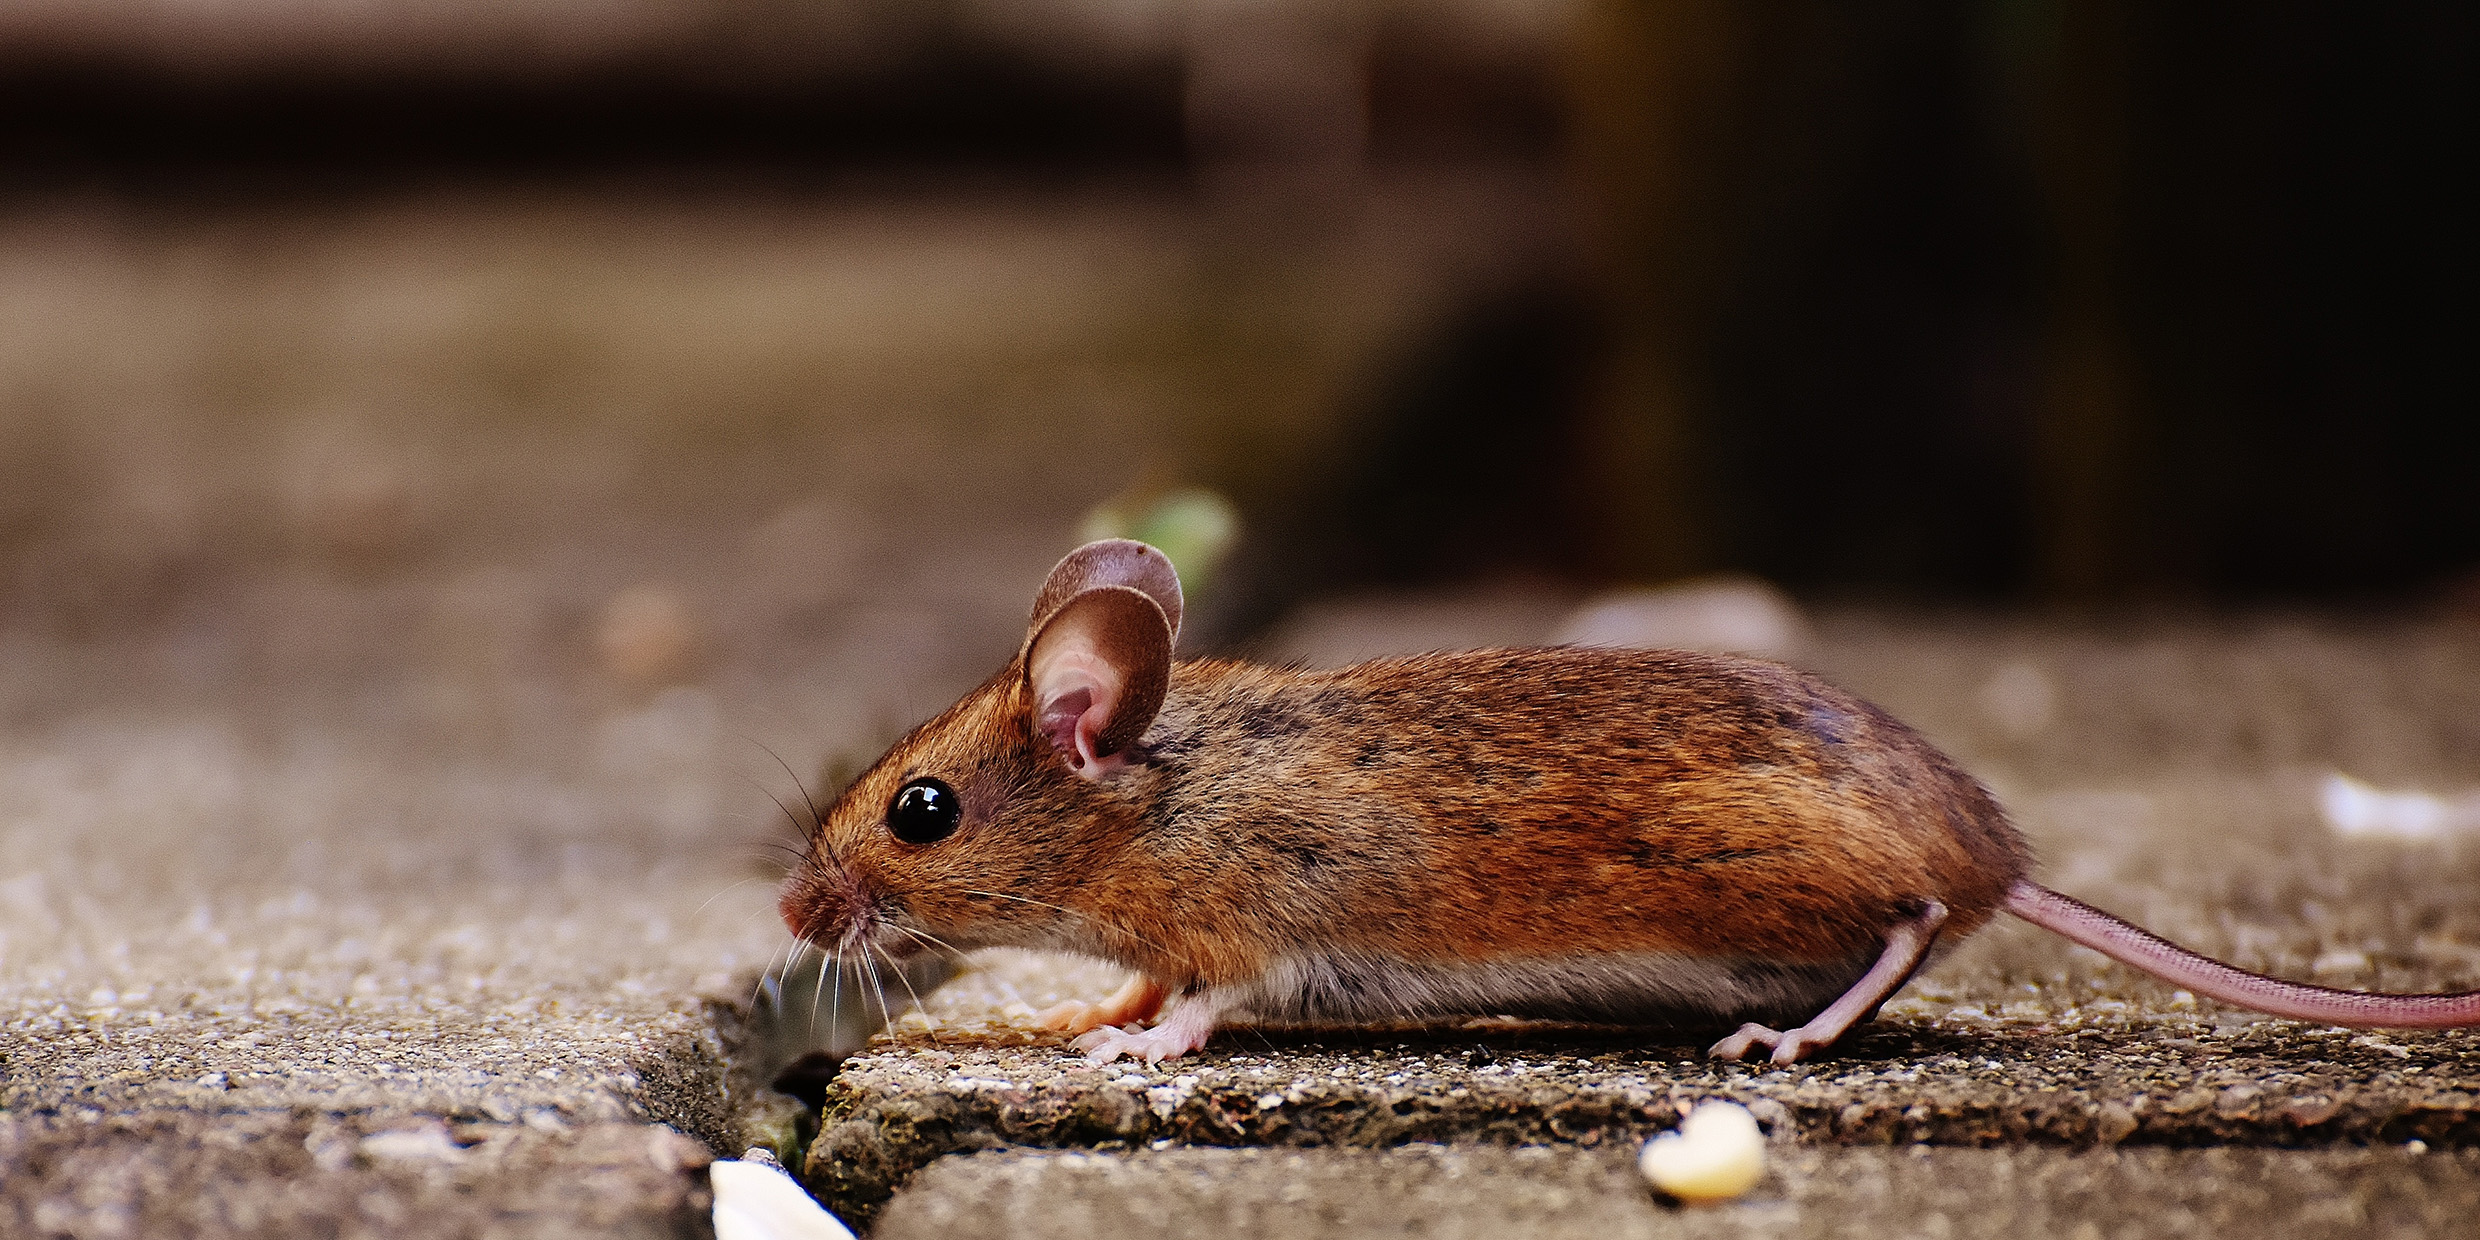 Image of a small brown mouse